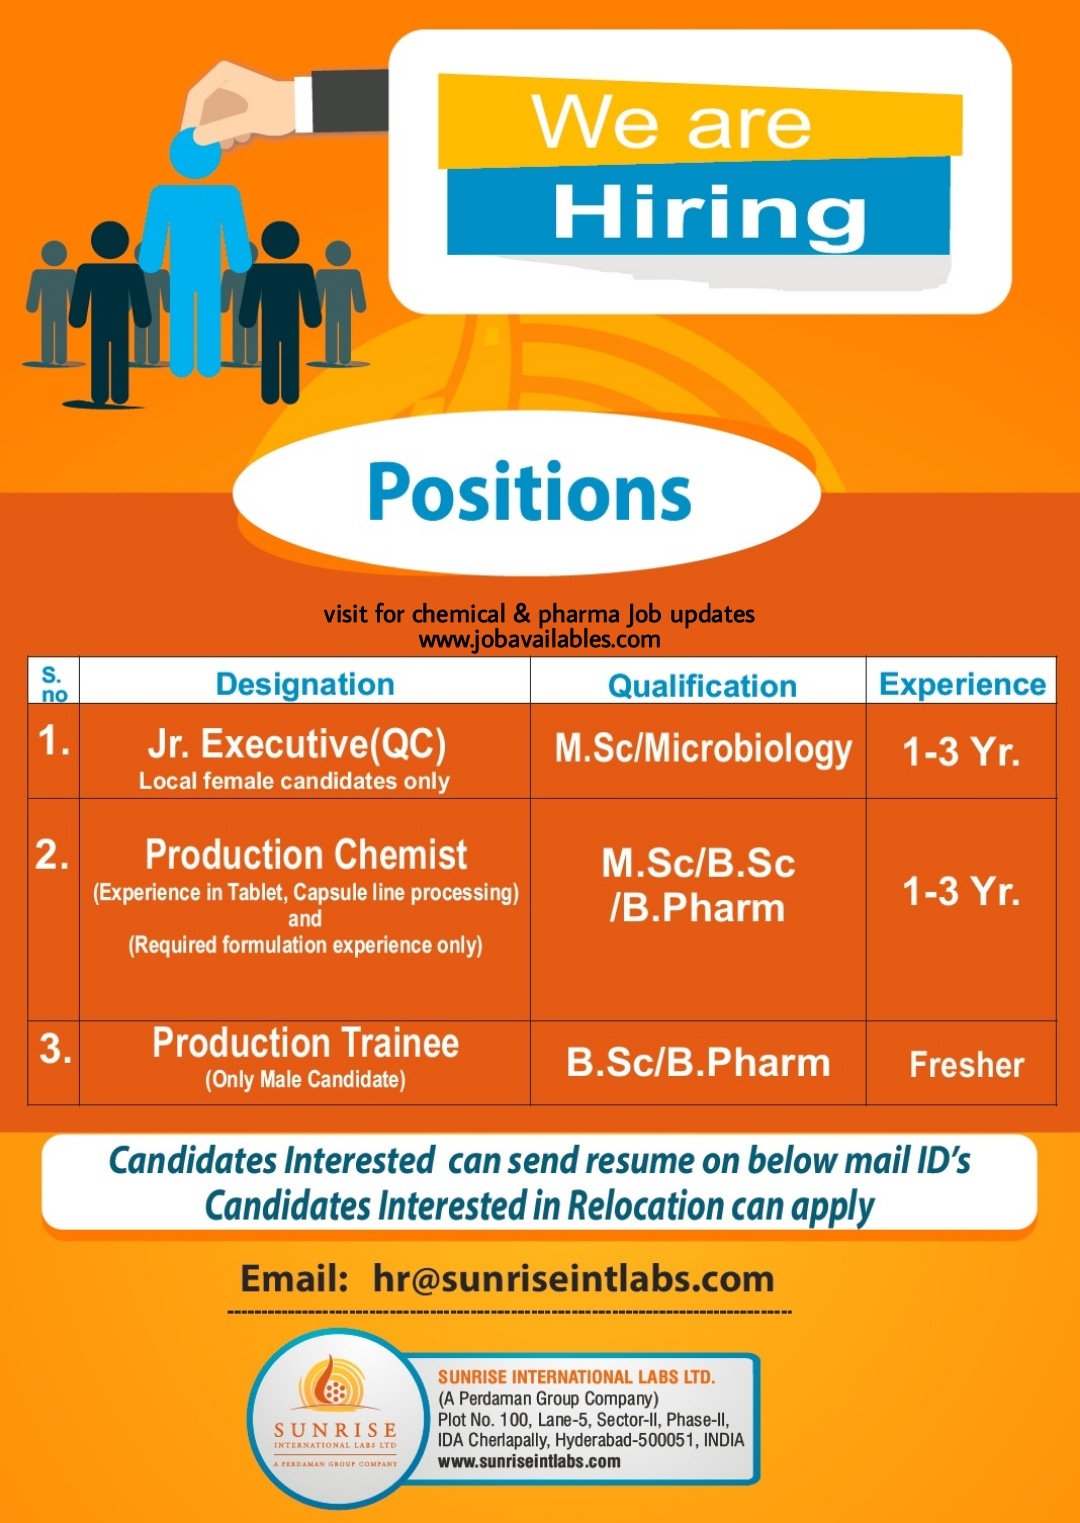 Job Availables, Sunrise International Labs Ltd Job Opening For Freshers & Experienced Msc/ Bsc/ B.Pharma/ Microbiology - QC/ Production Dept